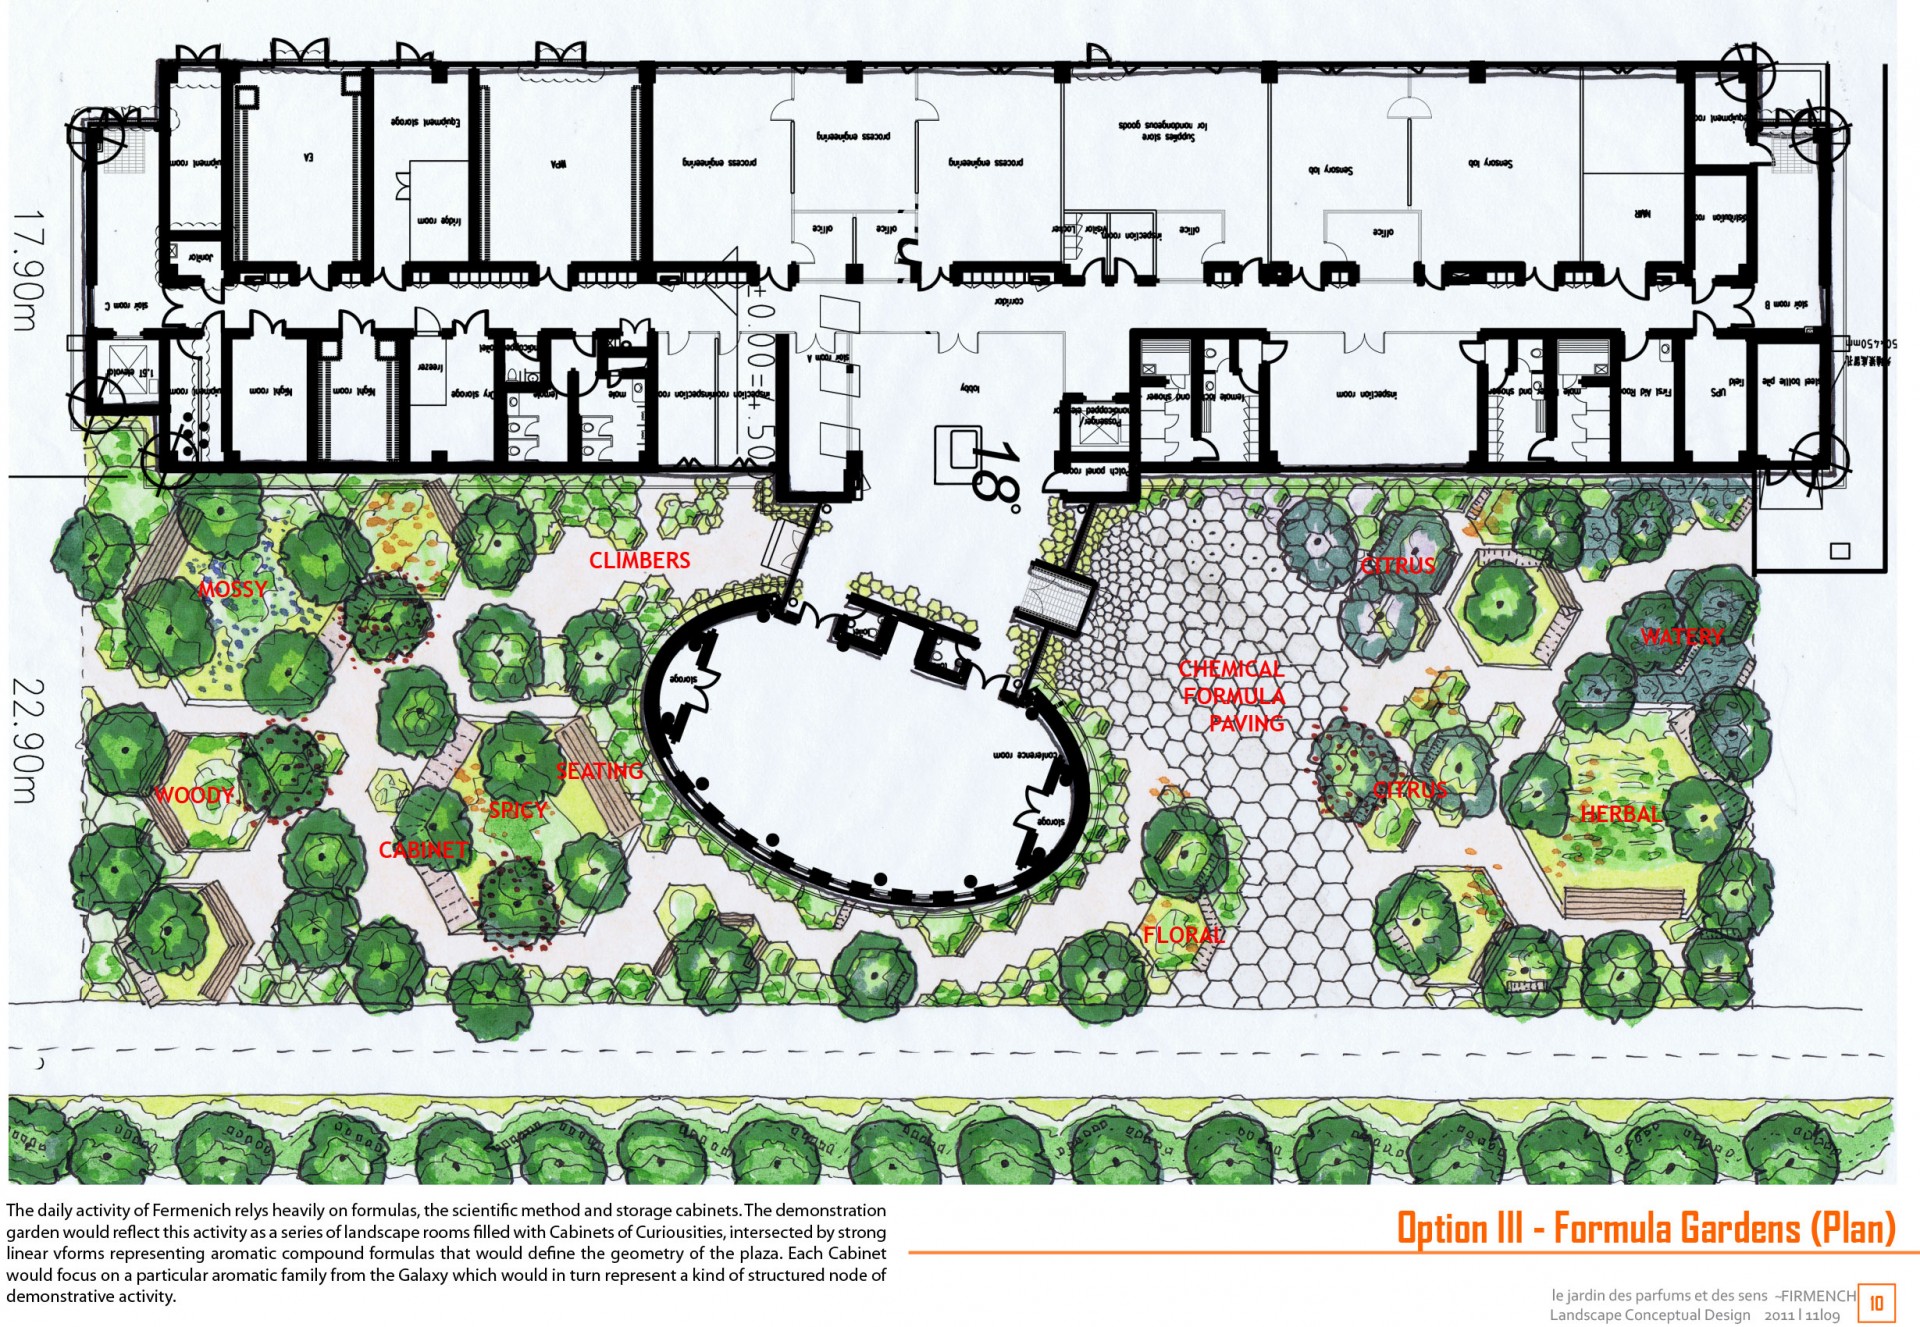 Hand-drawn plan with marker coloring and InDesign annotation.